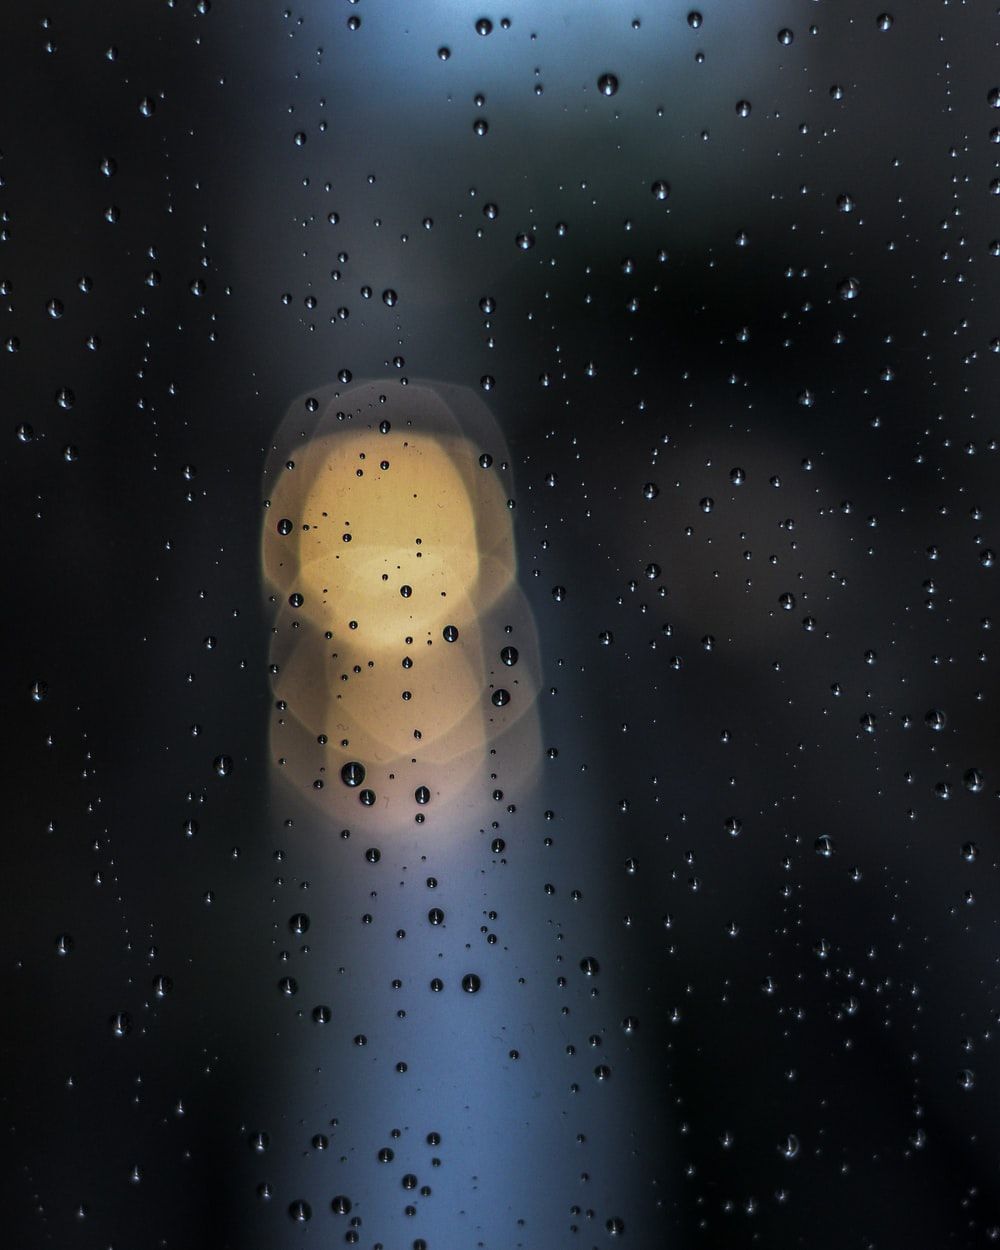 Rainy Night Picture. Download Free Image